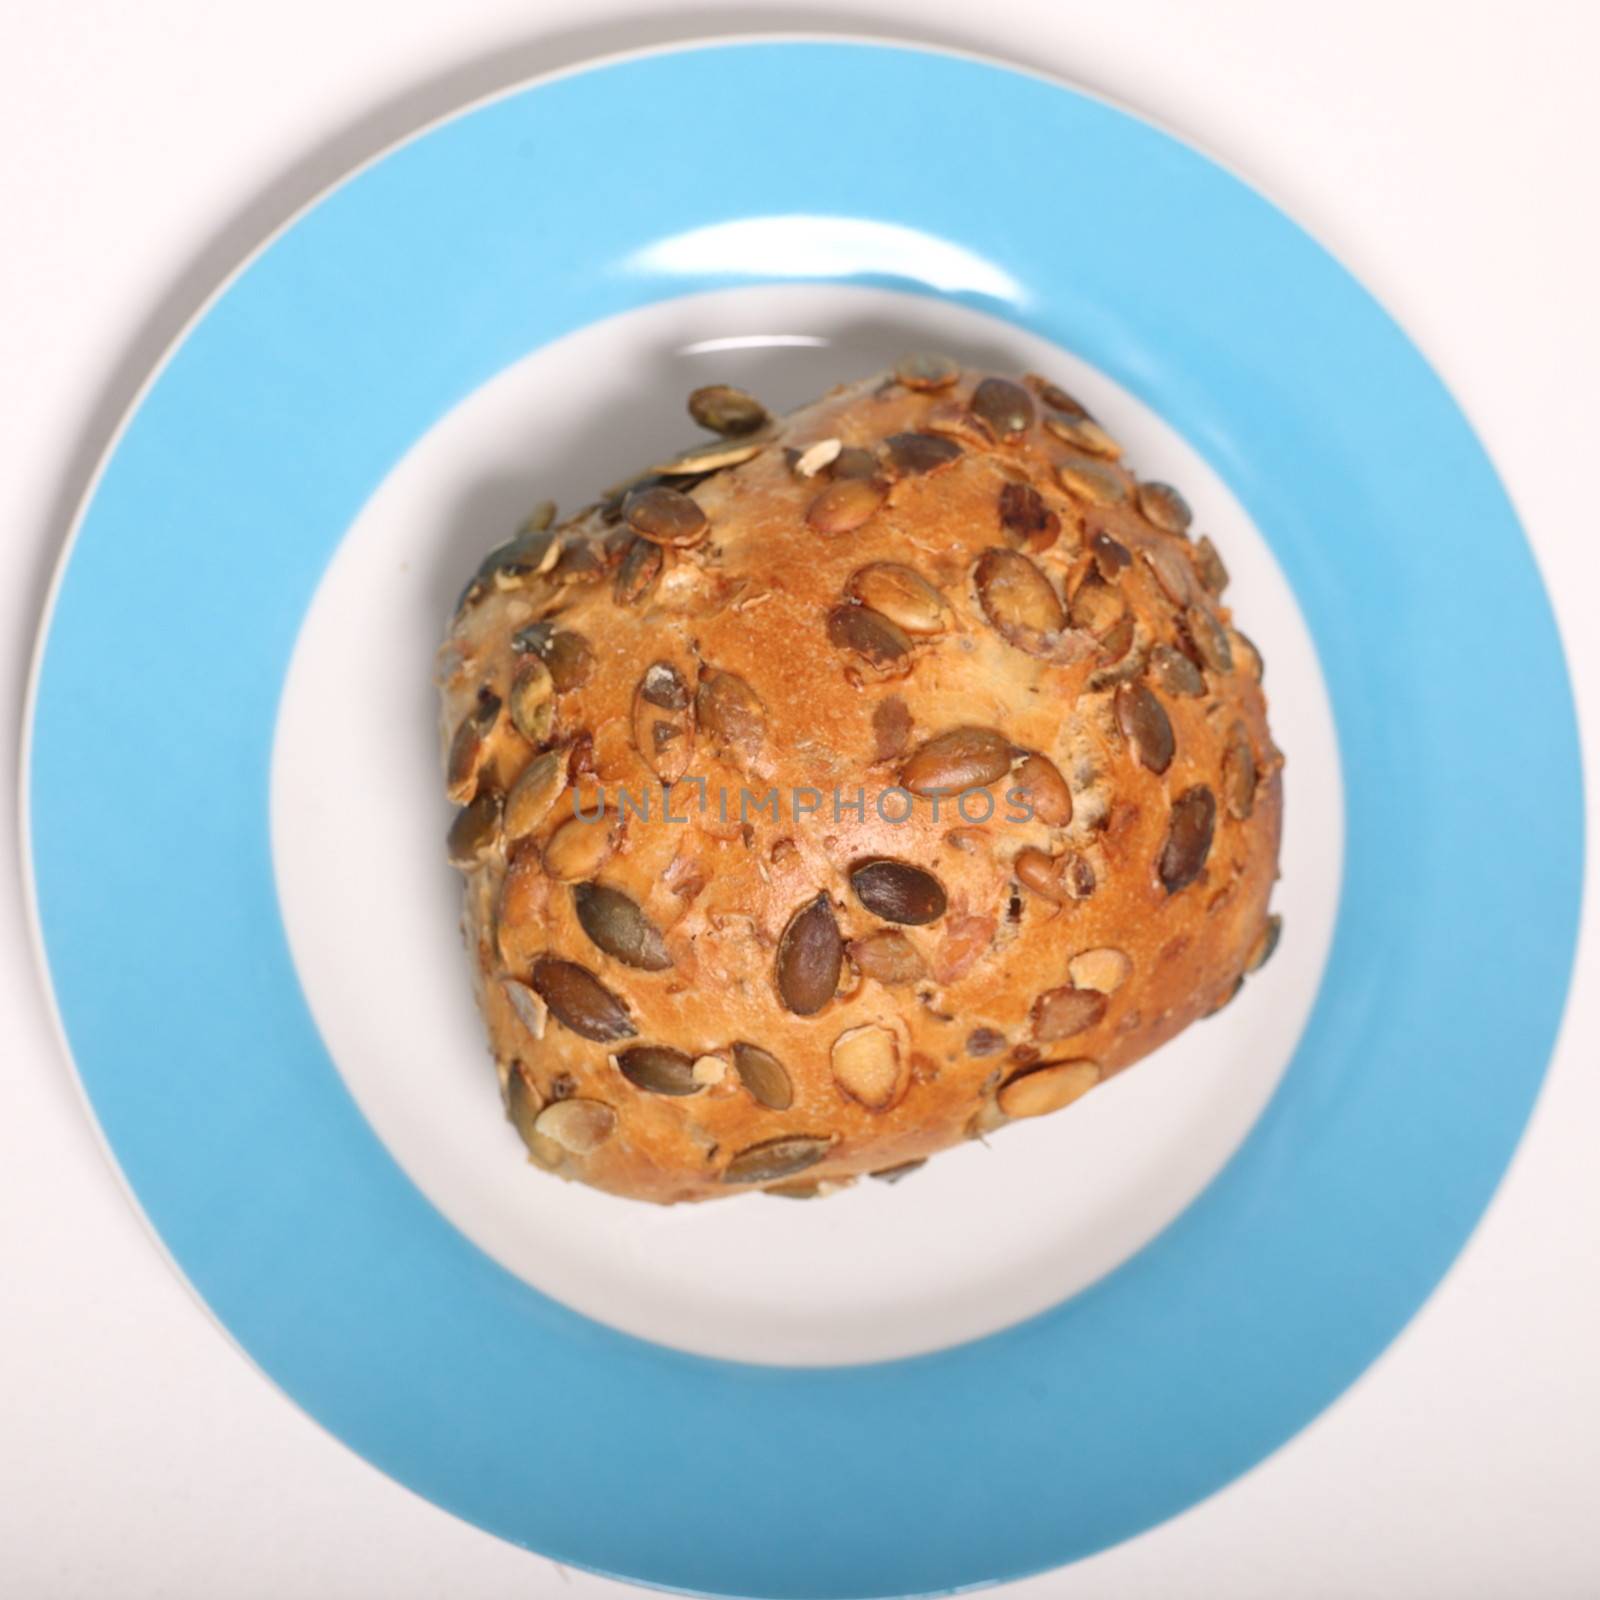 Overhead view of a golden crusty fresh sunflower seed roll served on a plate with a blue border for a tasty snack or as an accompaniment to a meal